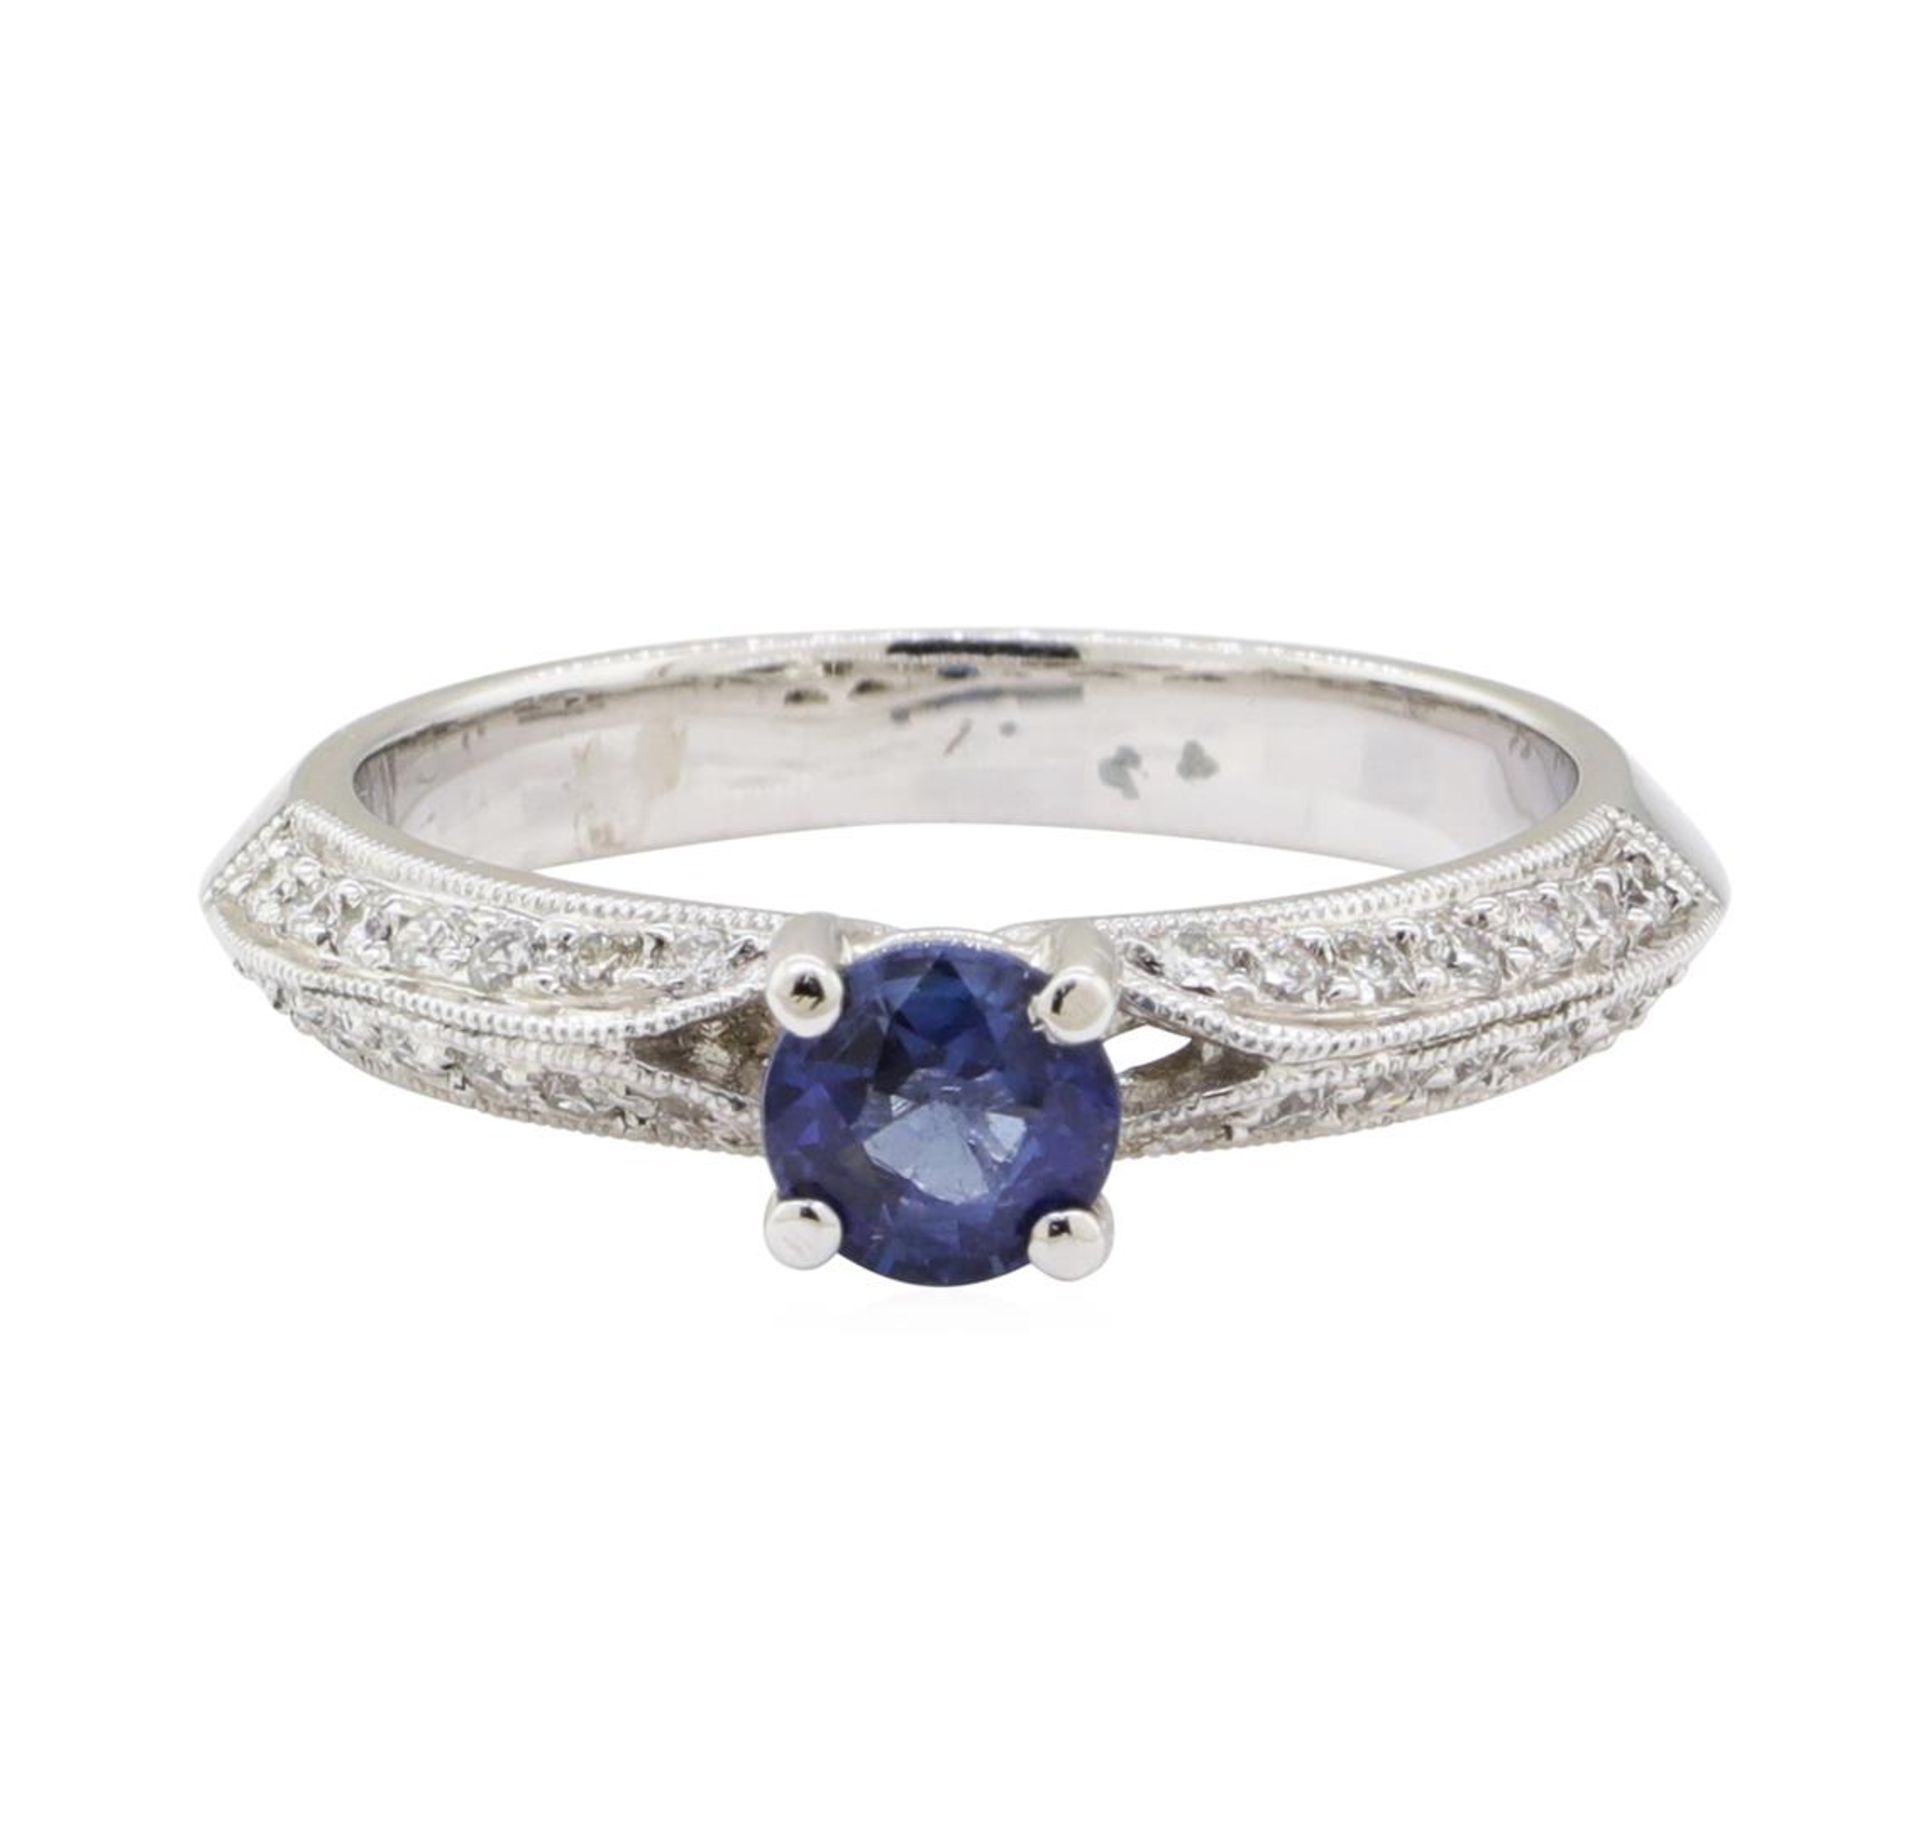 0.75 ctw Sapphire and Diamond Ring - 18KT White Gold - Image 2 of 4